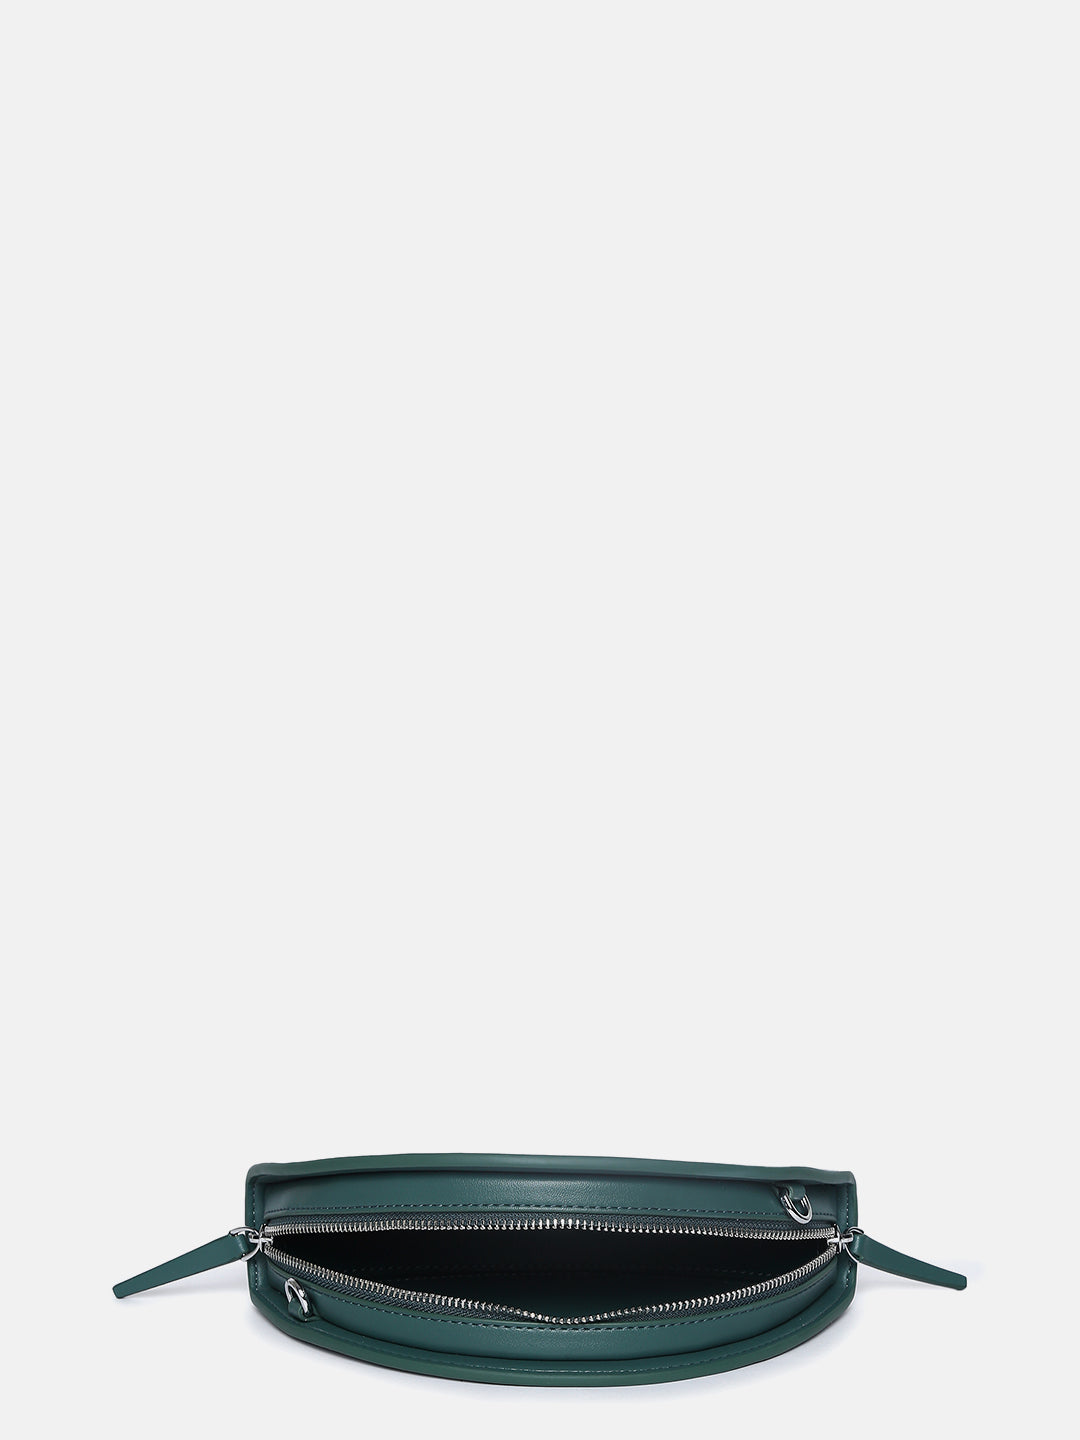 GREEN VEGAN LEATHER STRUCTURED SLING BAG WITH TASSELLED